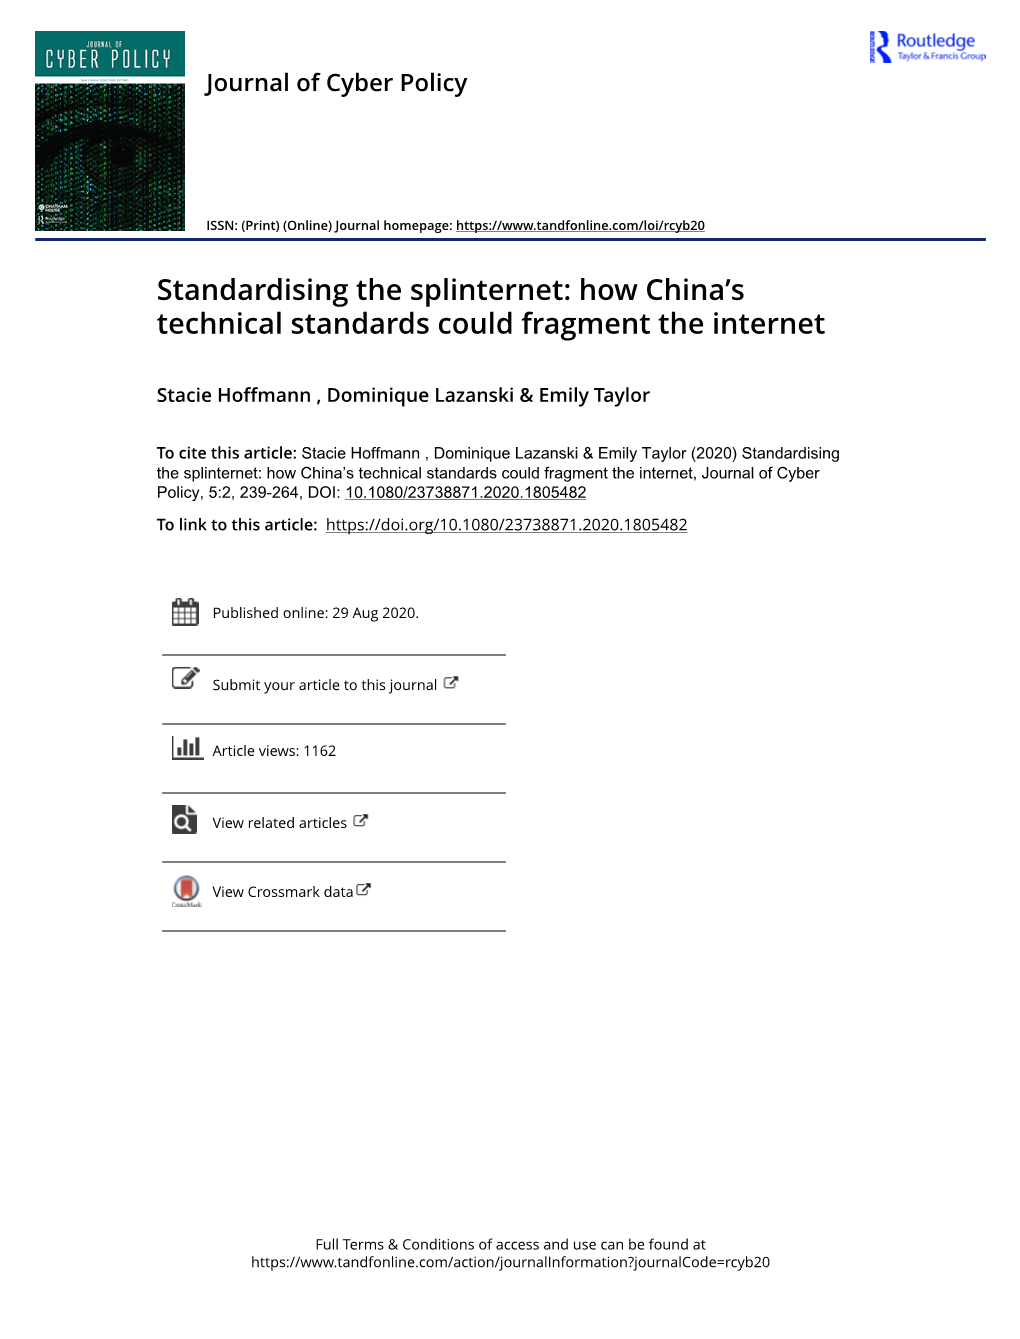 Standardising the Splinternet: How China's Technical Standards Could